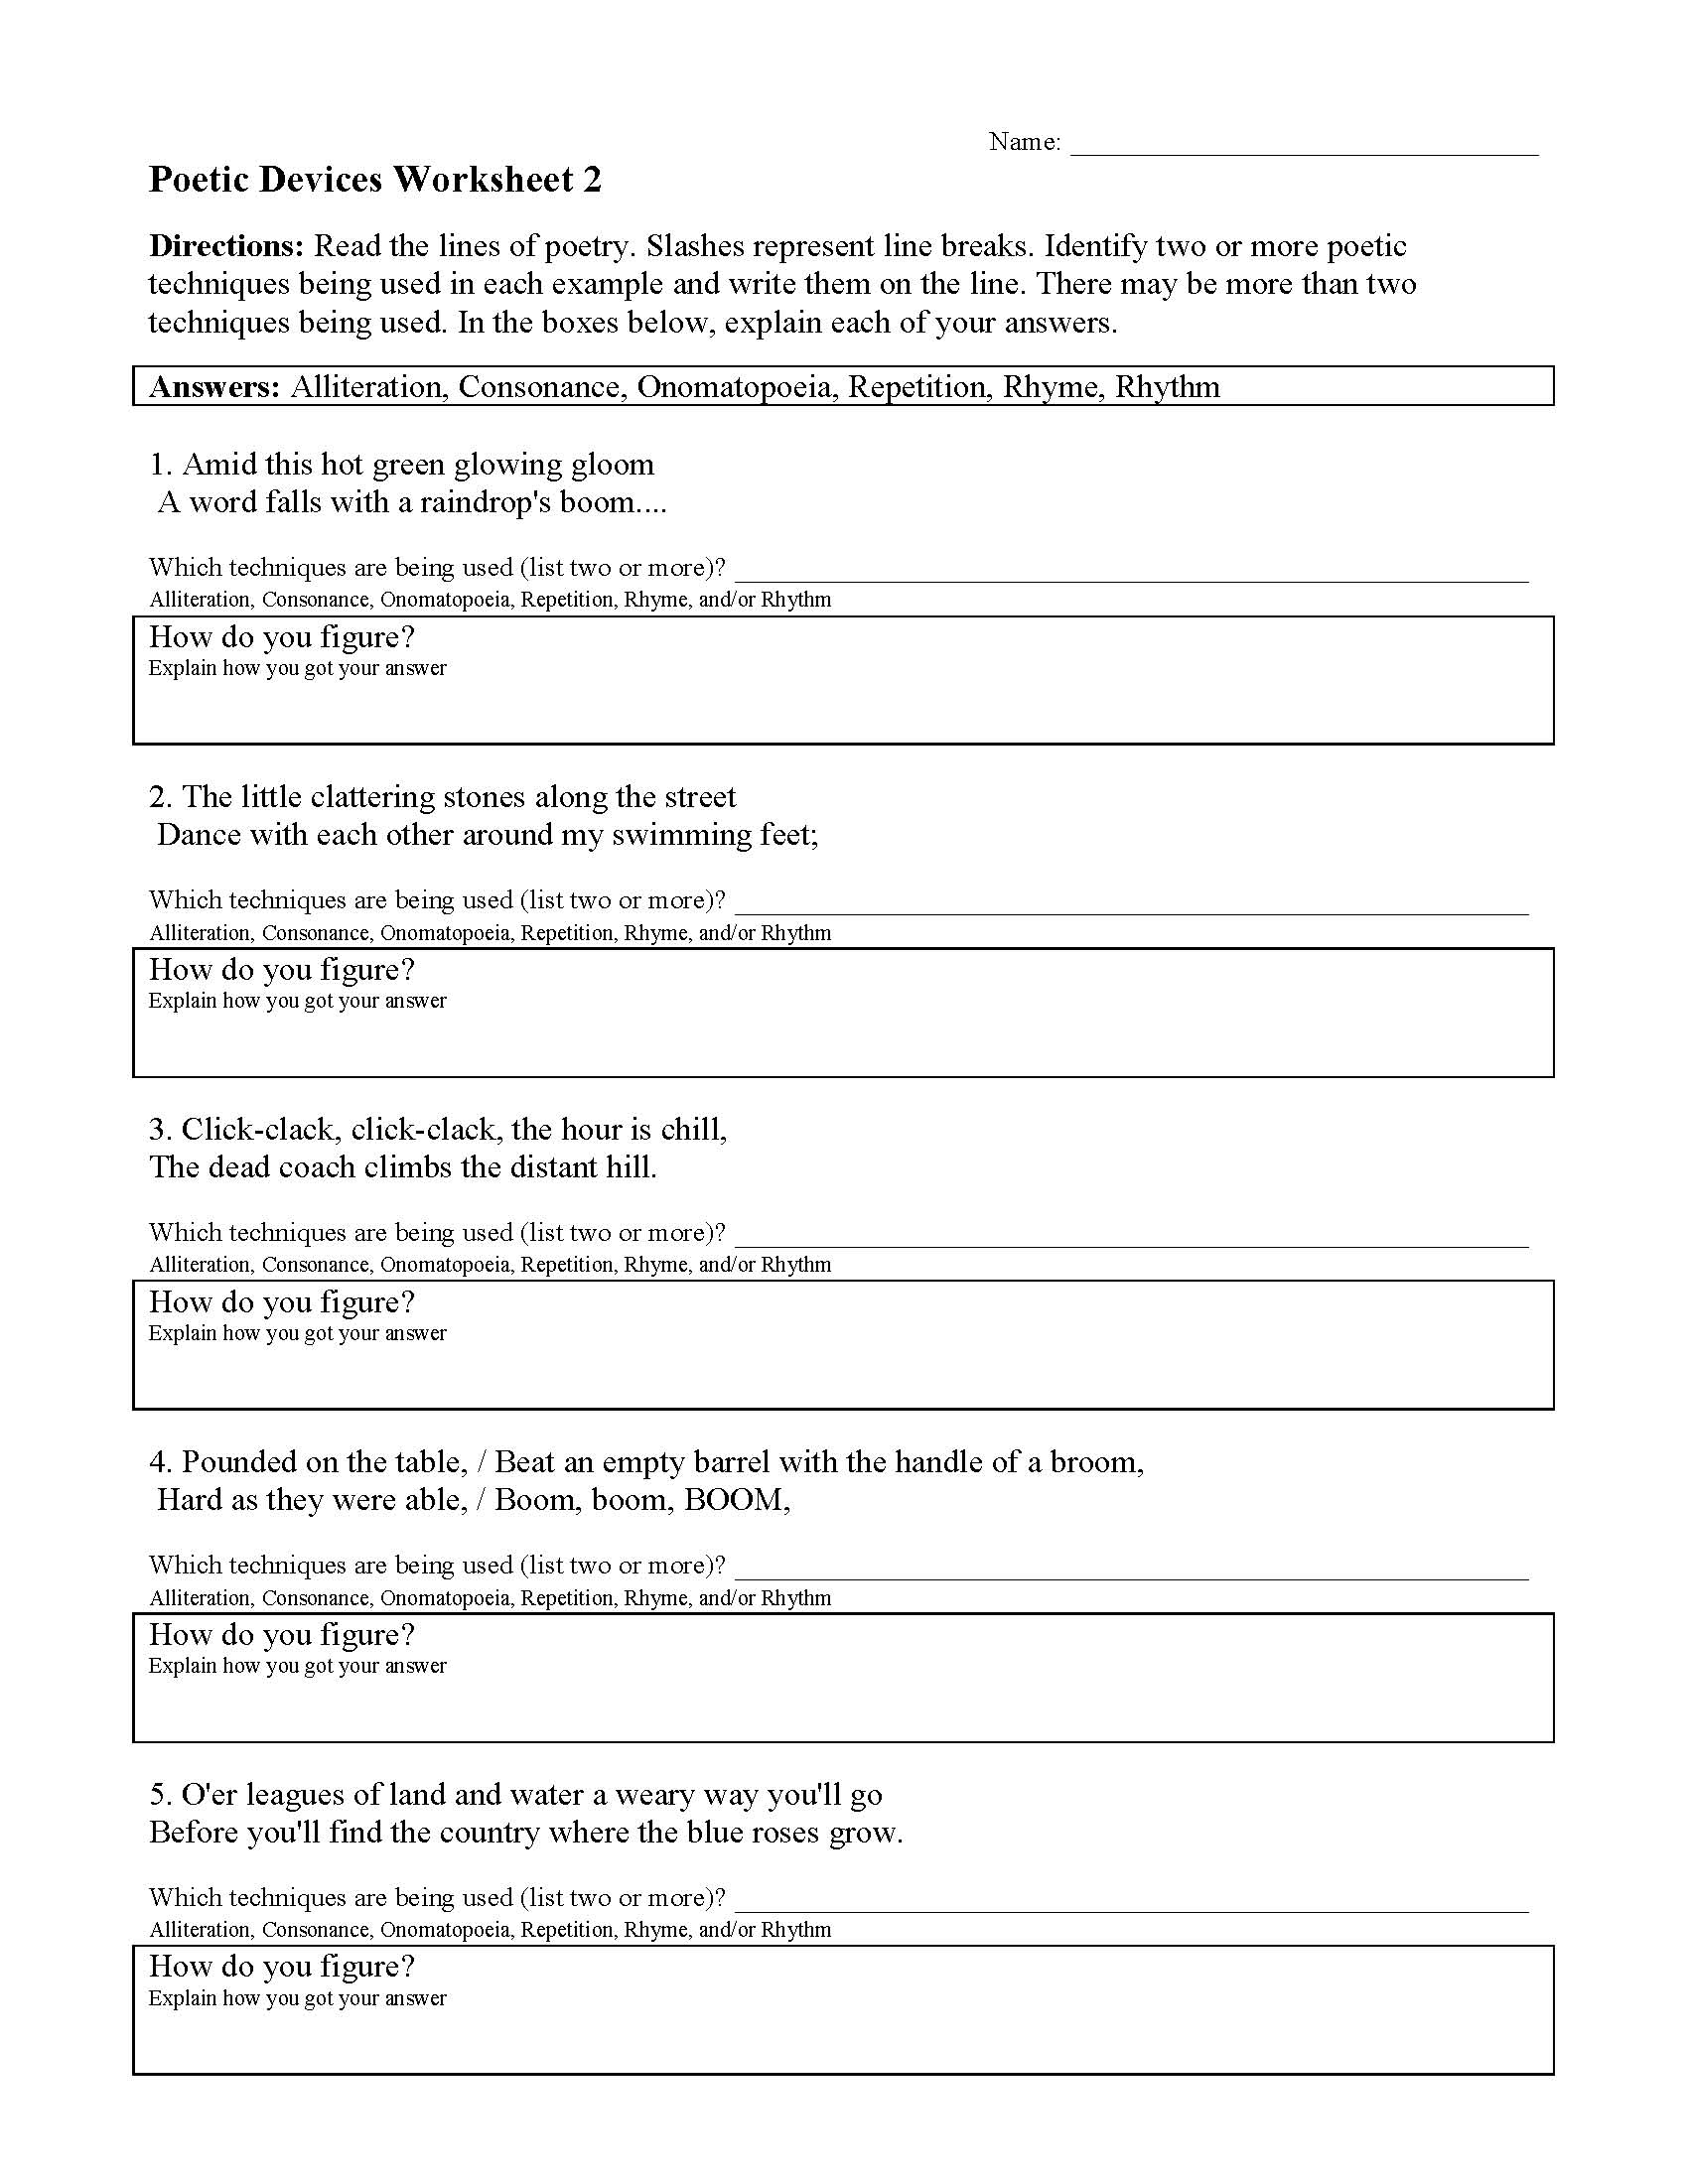 Poetic Devices Worksheets Activities Ereading Worksheets